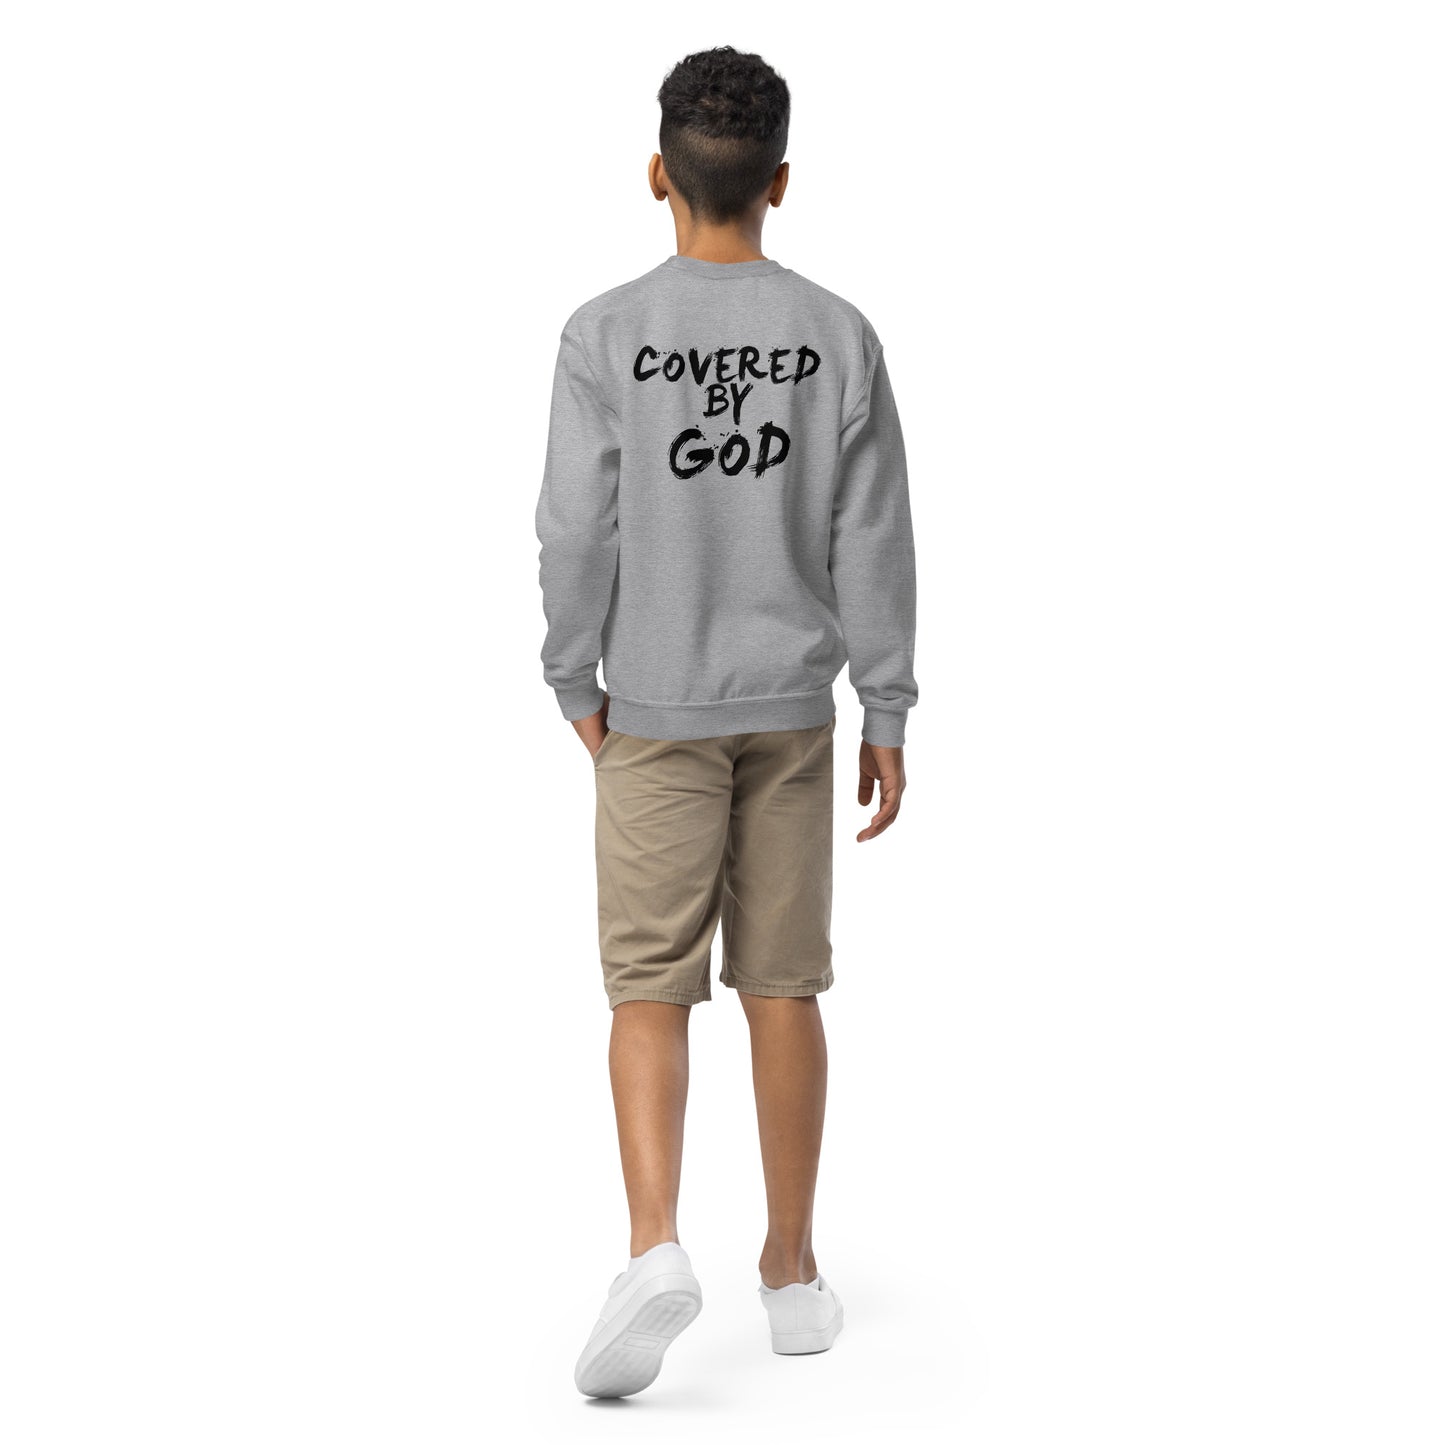 Youth I'm Just Out Here Trusting God Crewneck Sweatshirt